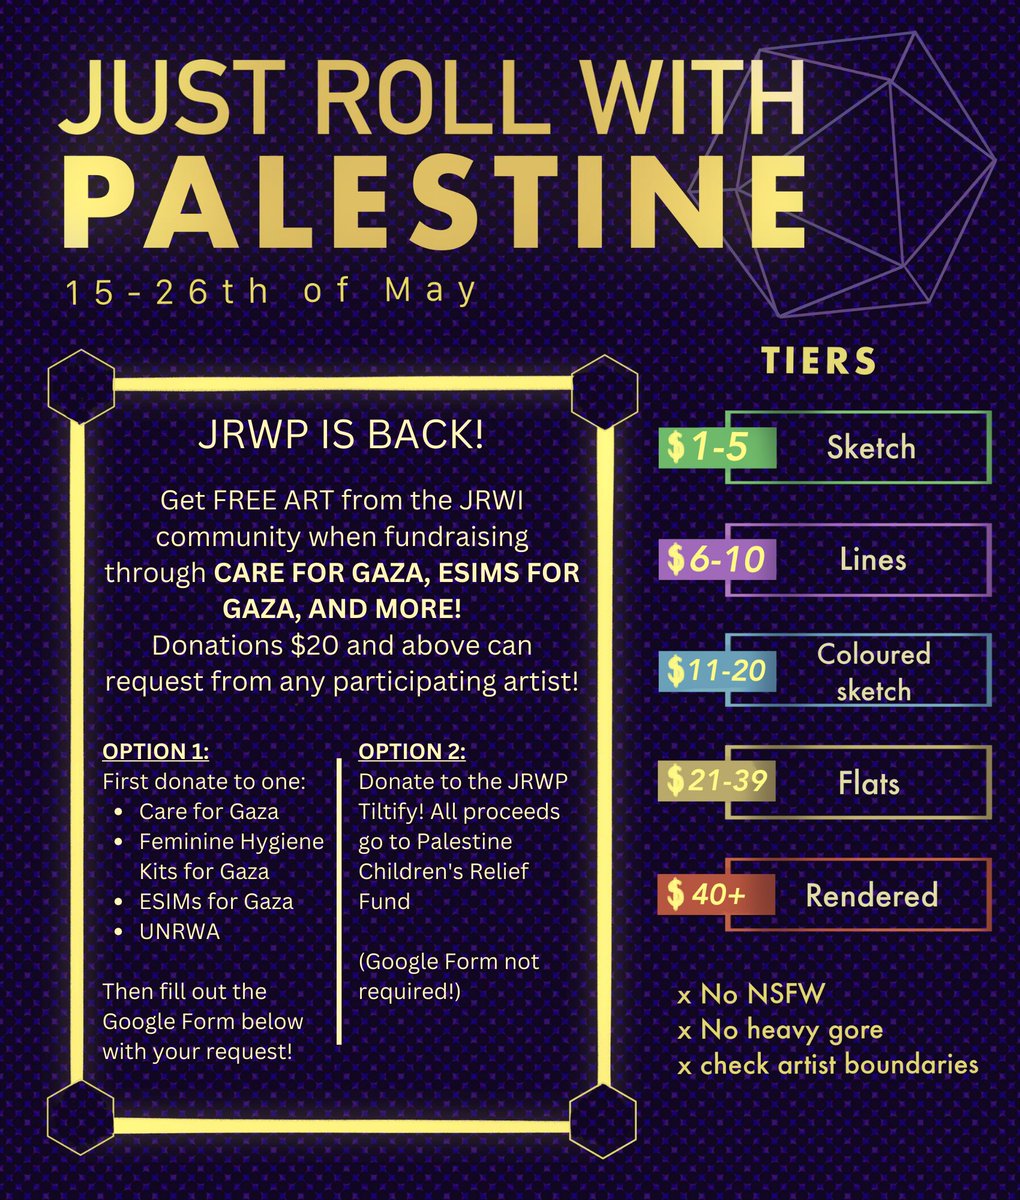 🍉🍉🍉 Hey everyone, #JustRollWithPalestine is back! From May 15-26th, you can get FREE ART by donating to one of the following below! Any amount appreciated, and even if you can't donate, spread the word!